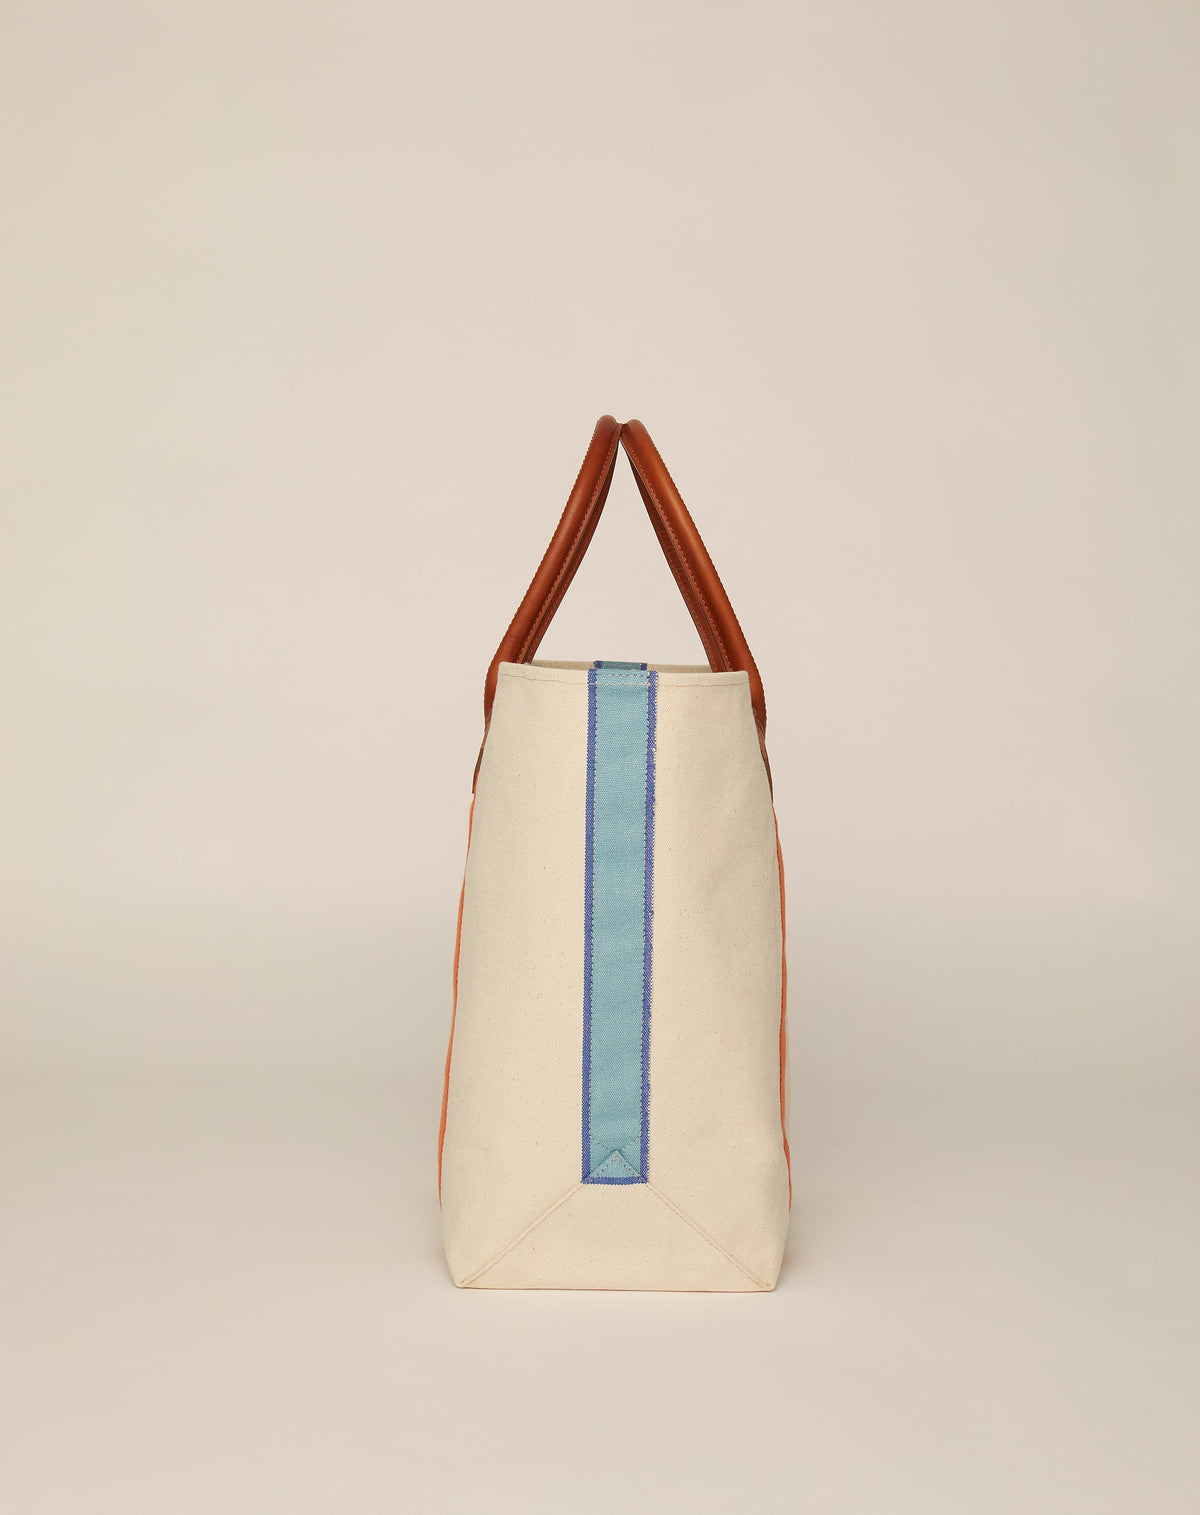 Profile image of medium-sized classic canvas tote bag in natural ecru colour with tan leather handles and contrasting stripes.